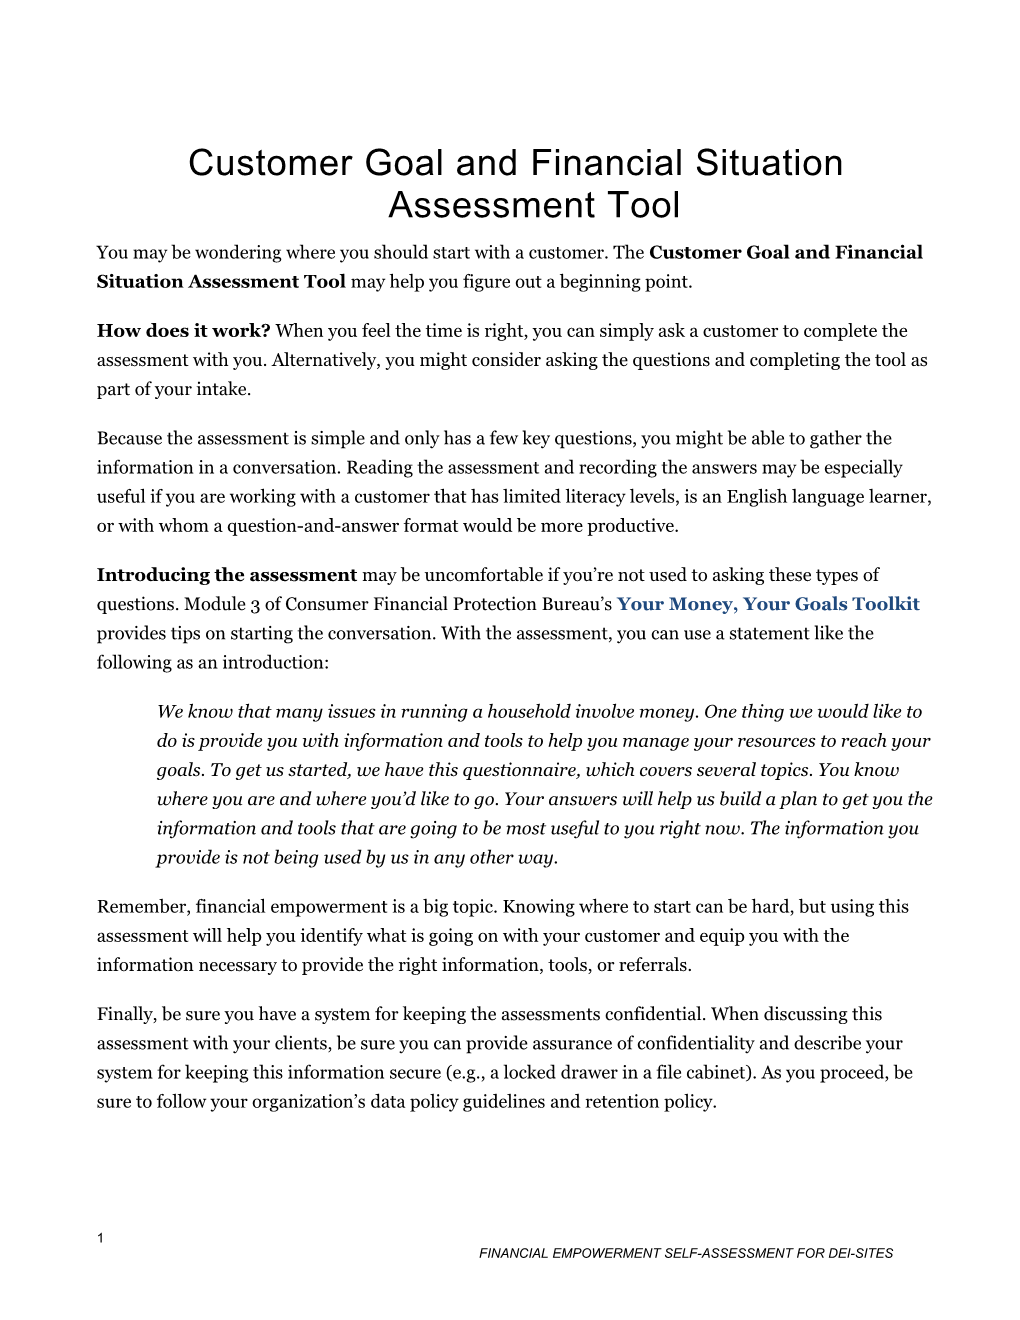 Customer Goal and Financial Situation Assessment Tool